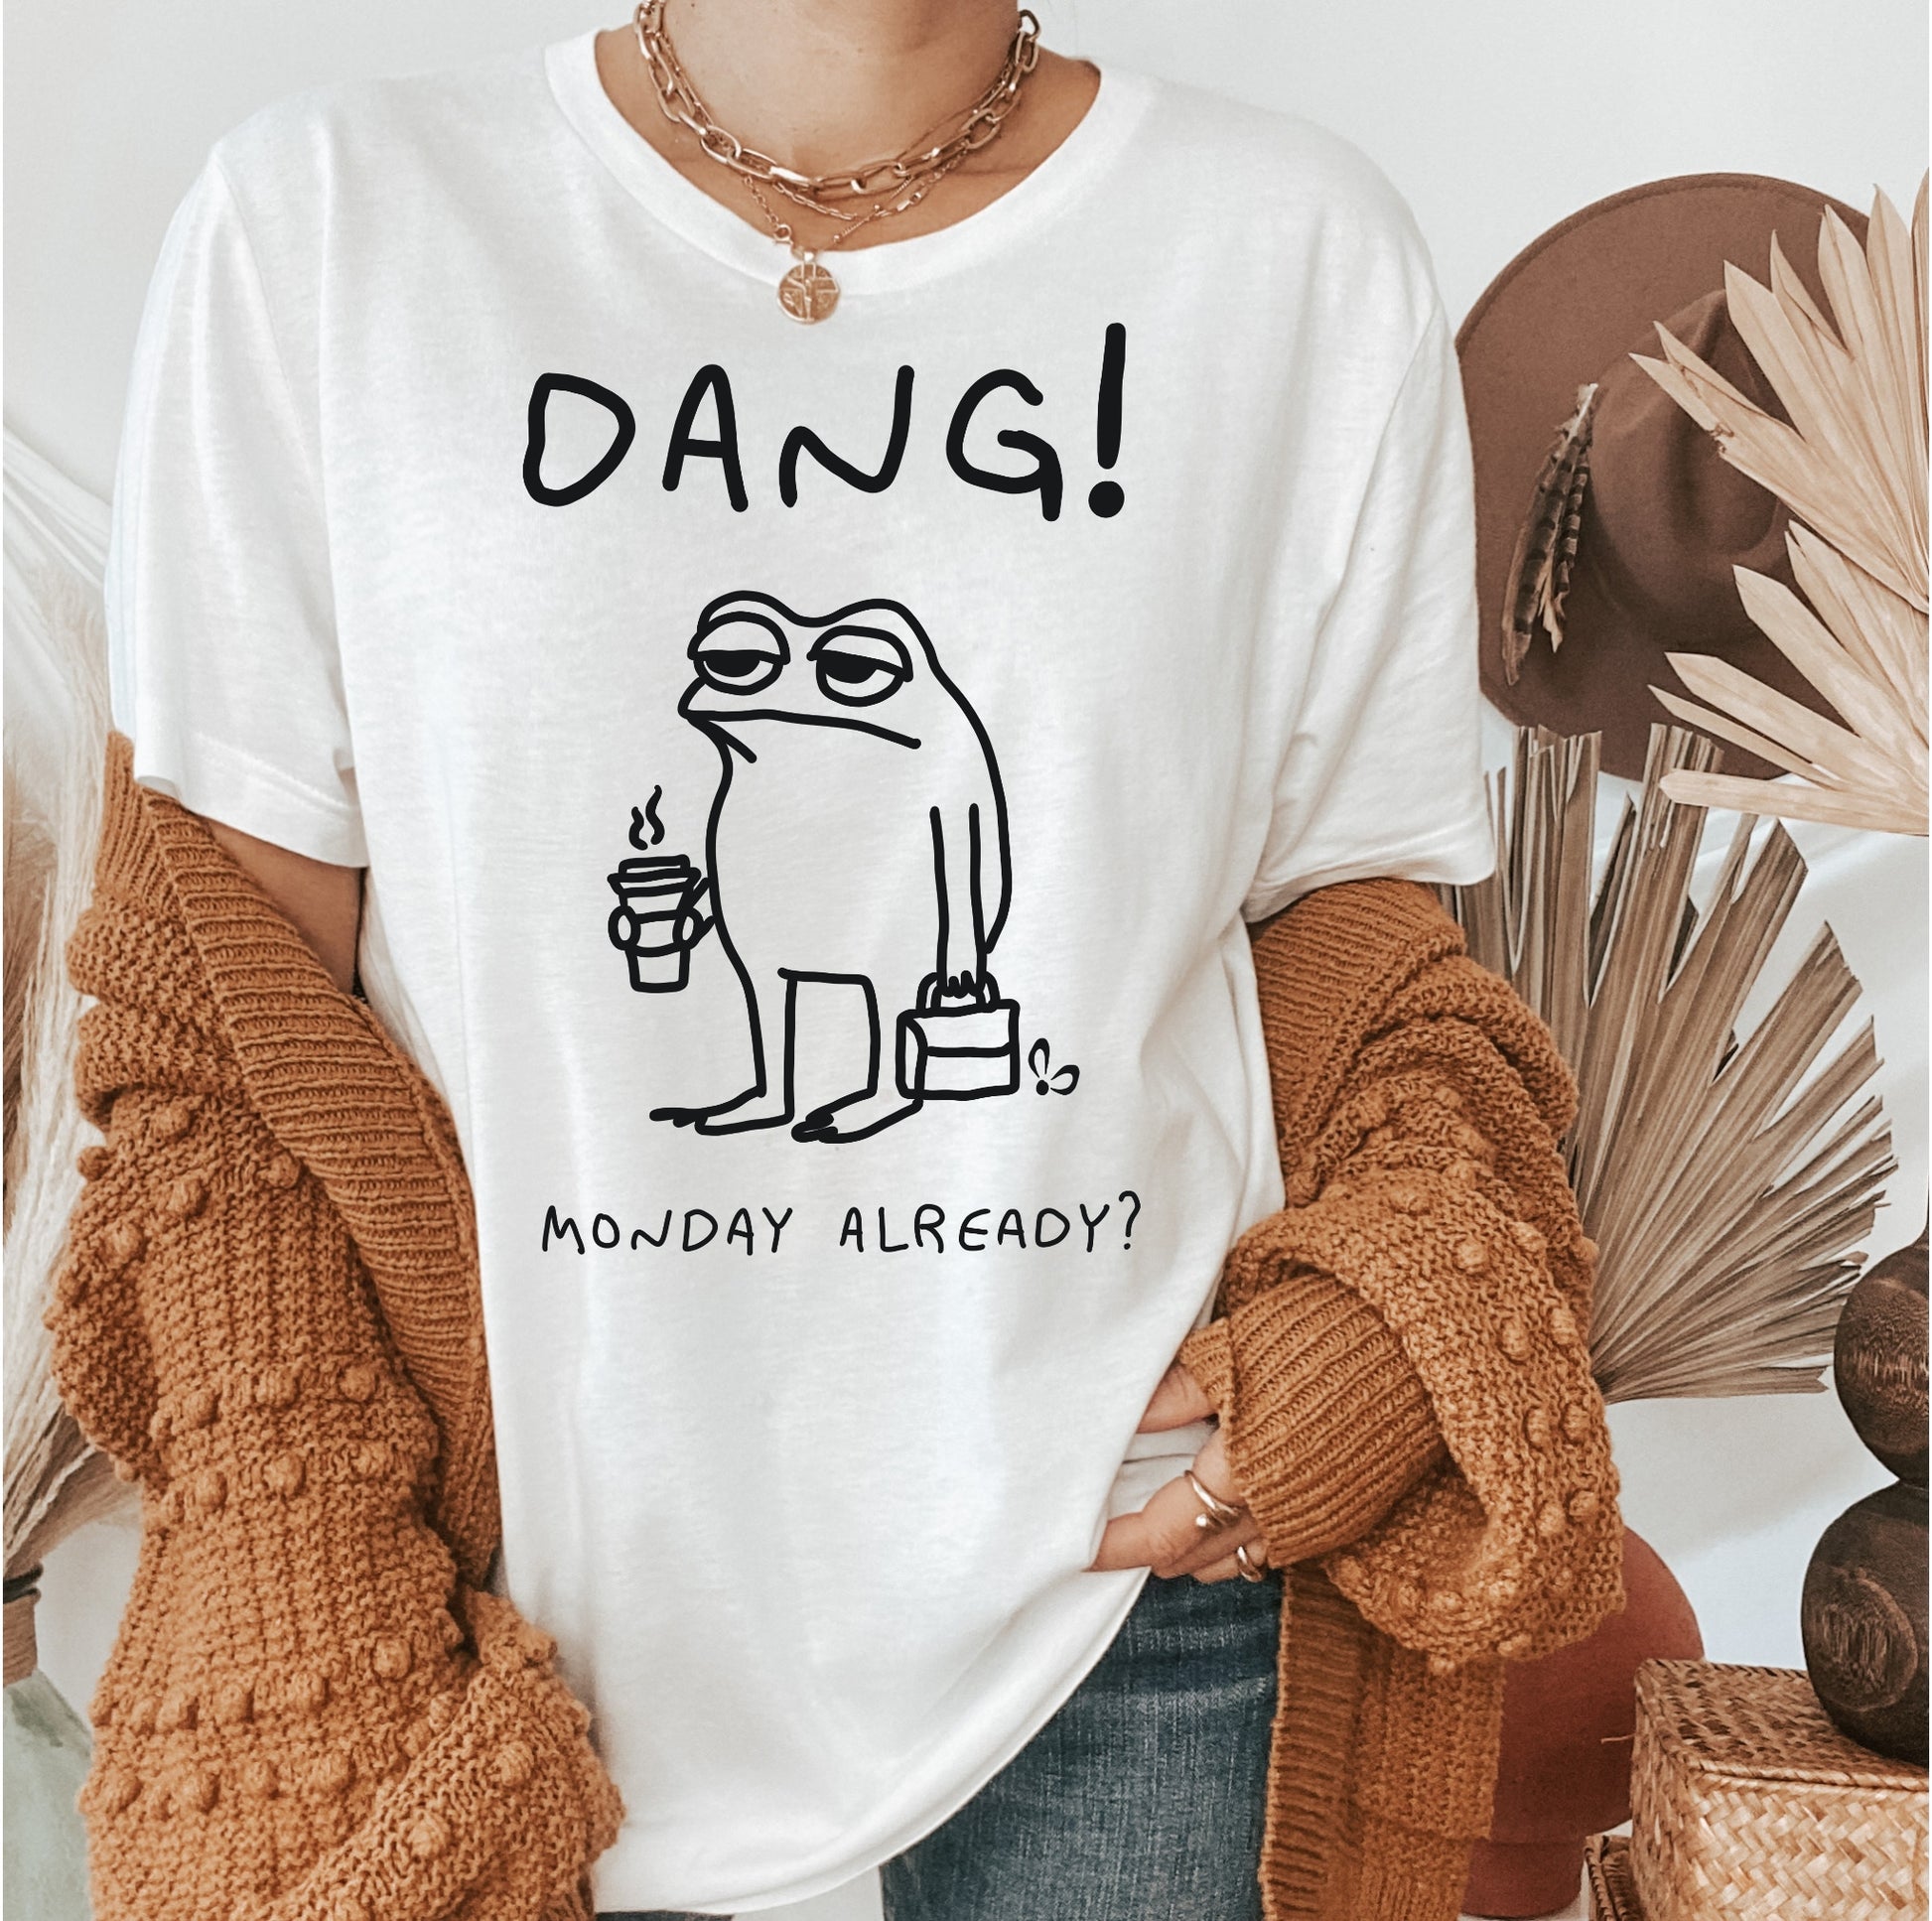 cotton tshirt printed with unimpressed frog illustration and monday meme